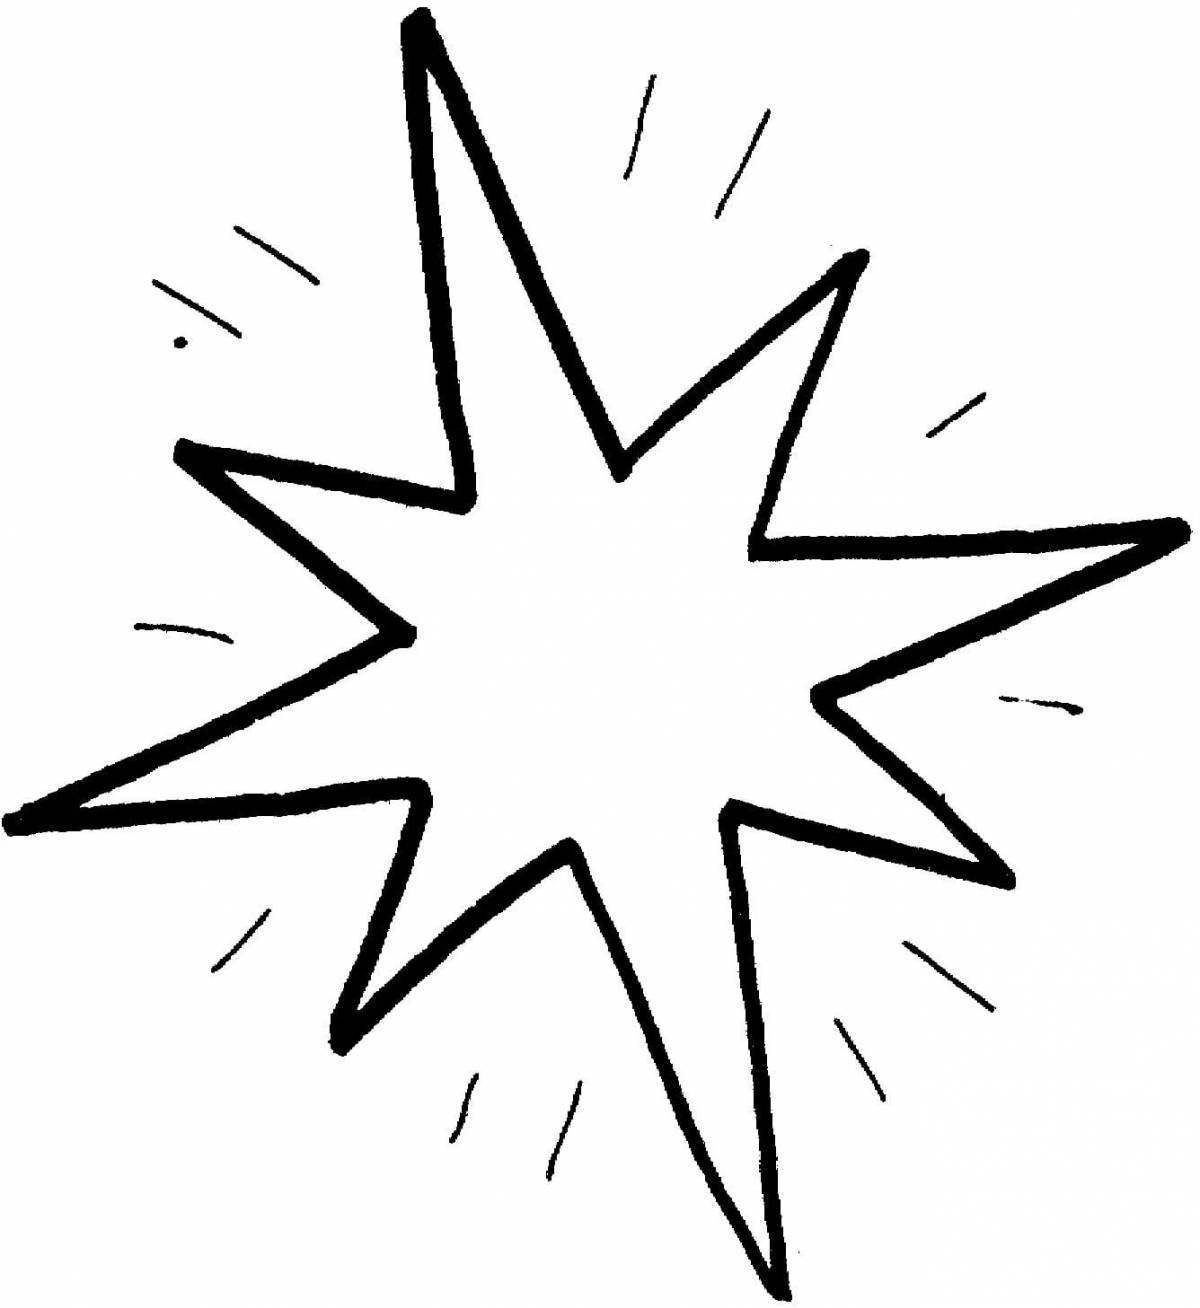 Delightful coloring picture star pattern